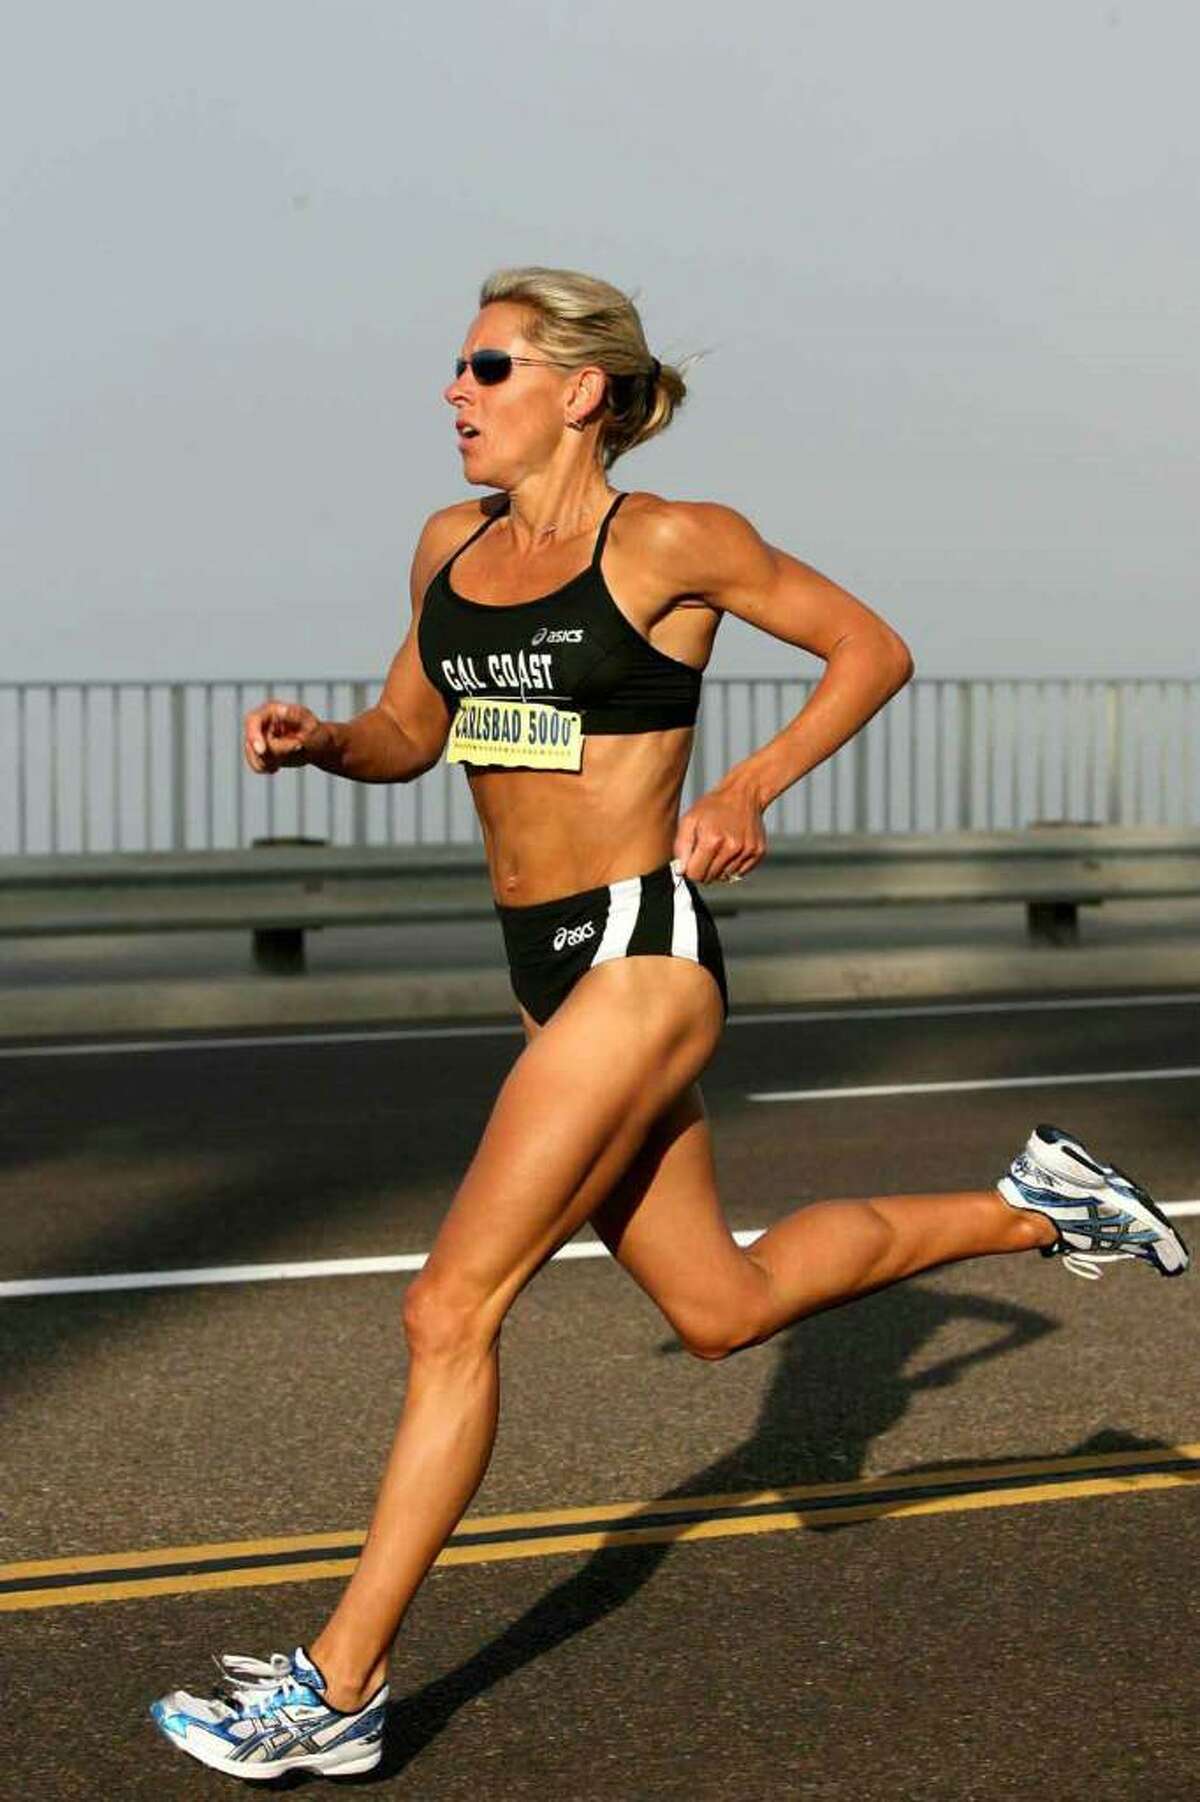 Ceci Hopp St. Geme competes during a 5K race in California.